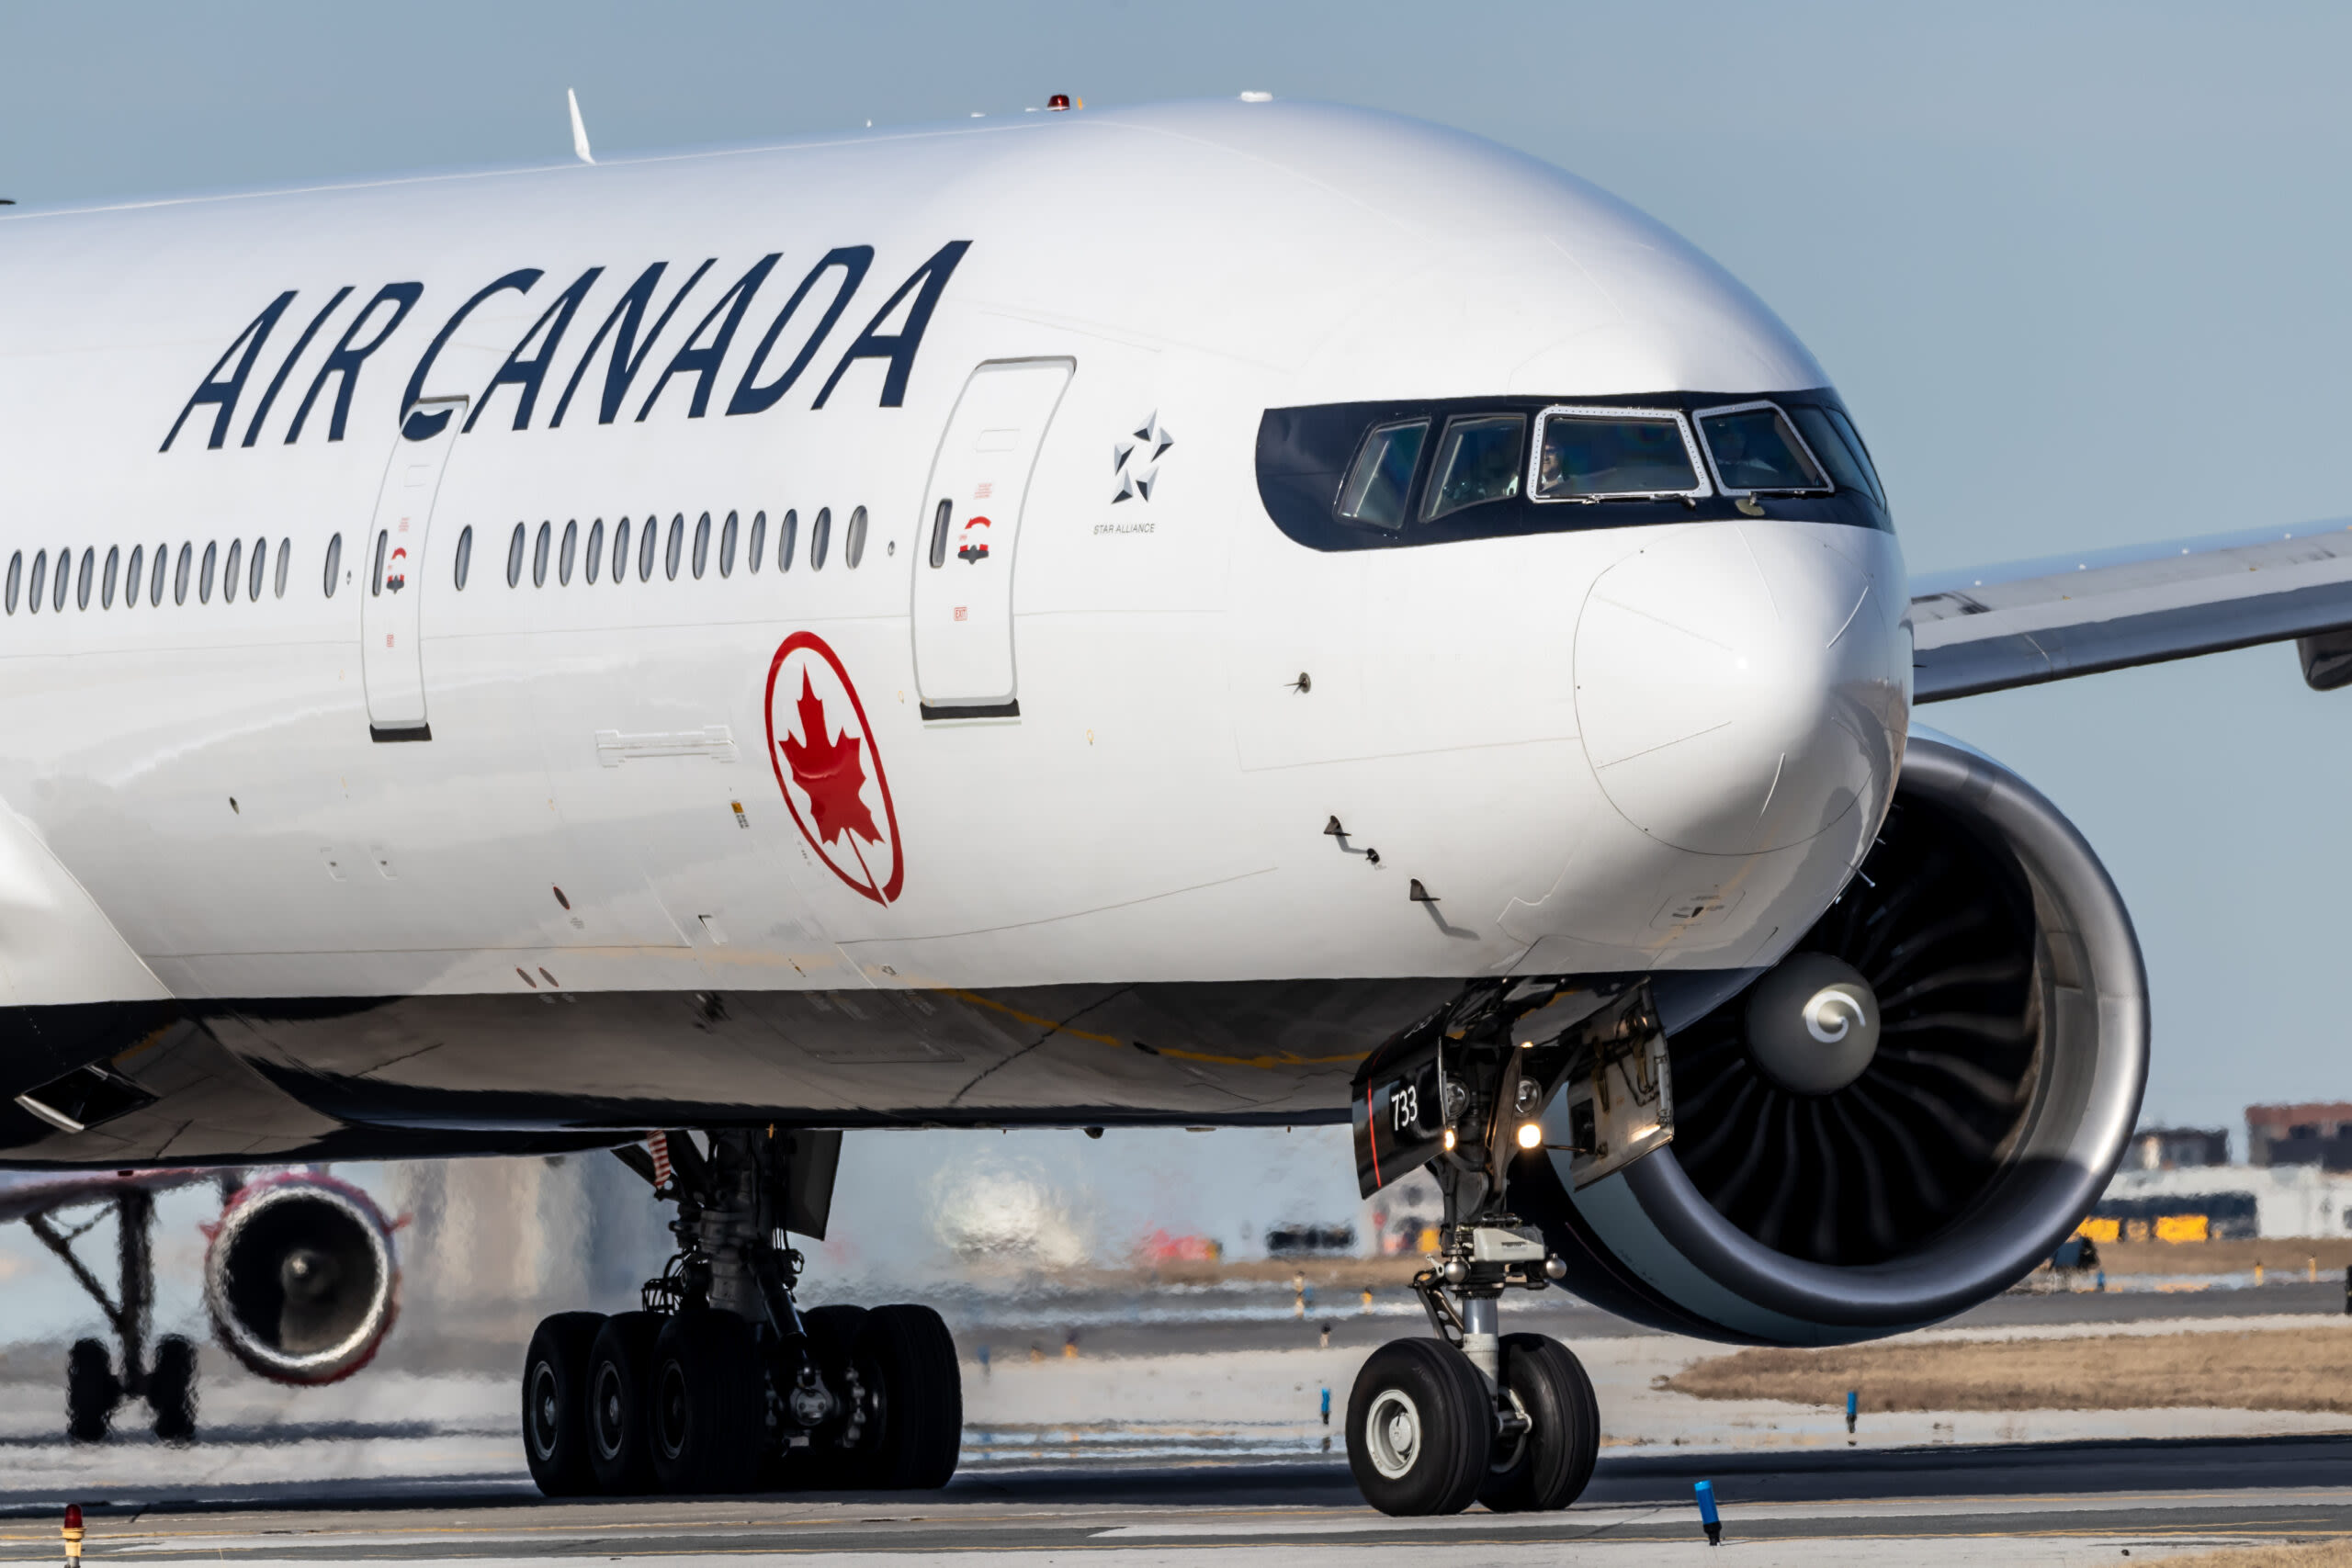 Air Canada flight attendant loses her cool: "Everyone, behave!" (video)